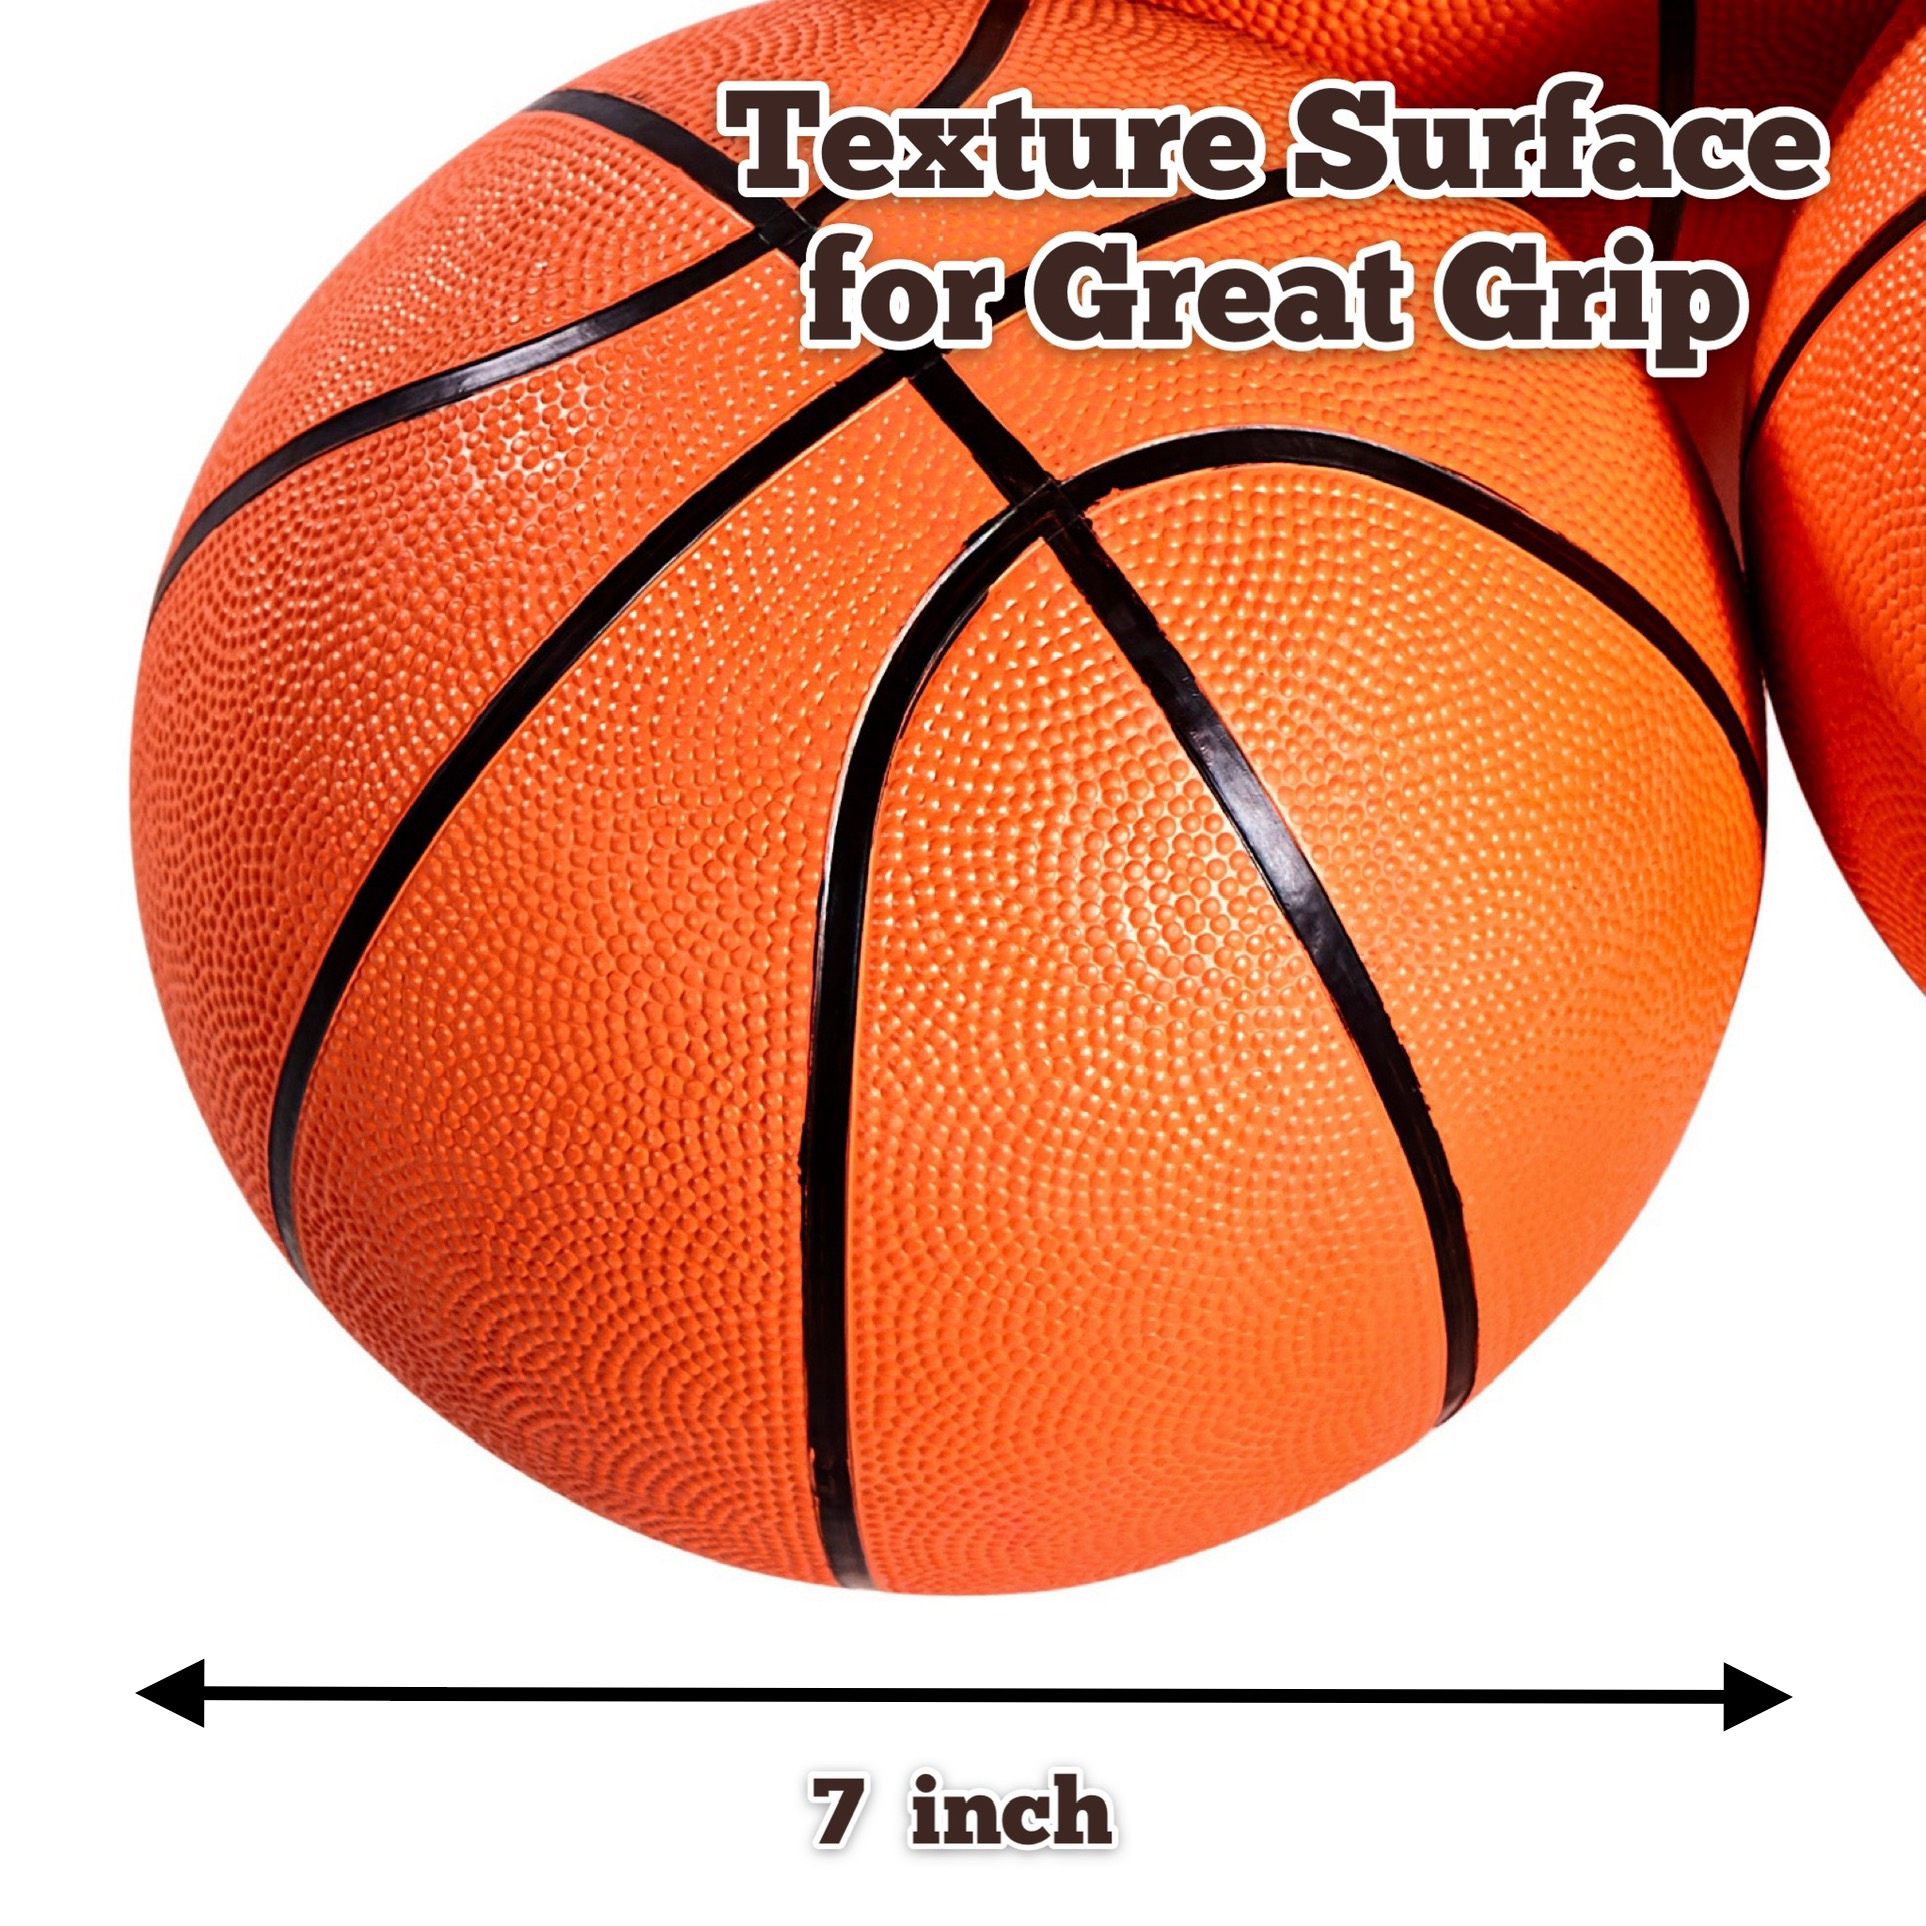 MD Sports 7" 3pcs Rubber Arcade Basketballs Replacement - image 3 of 10